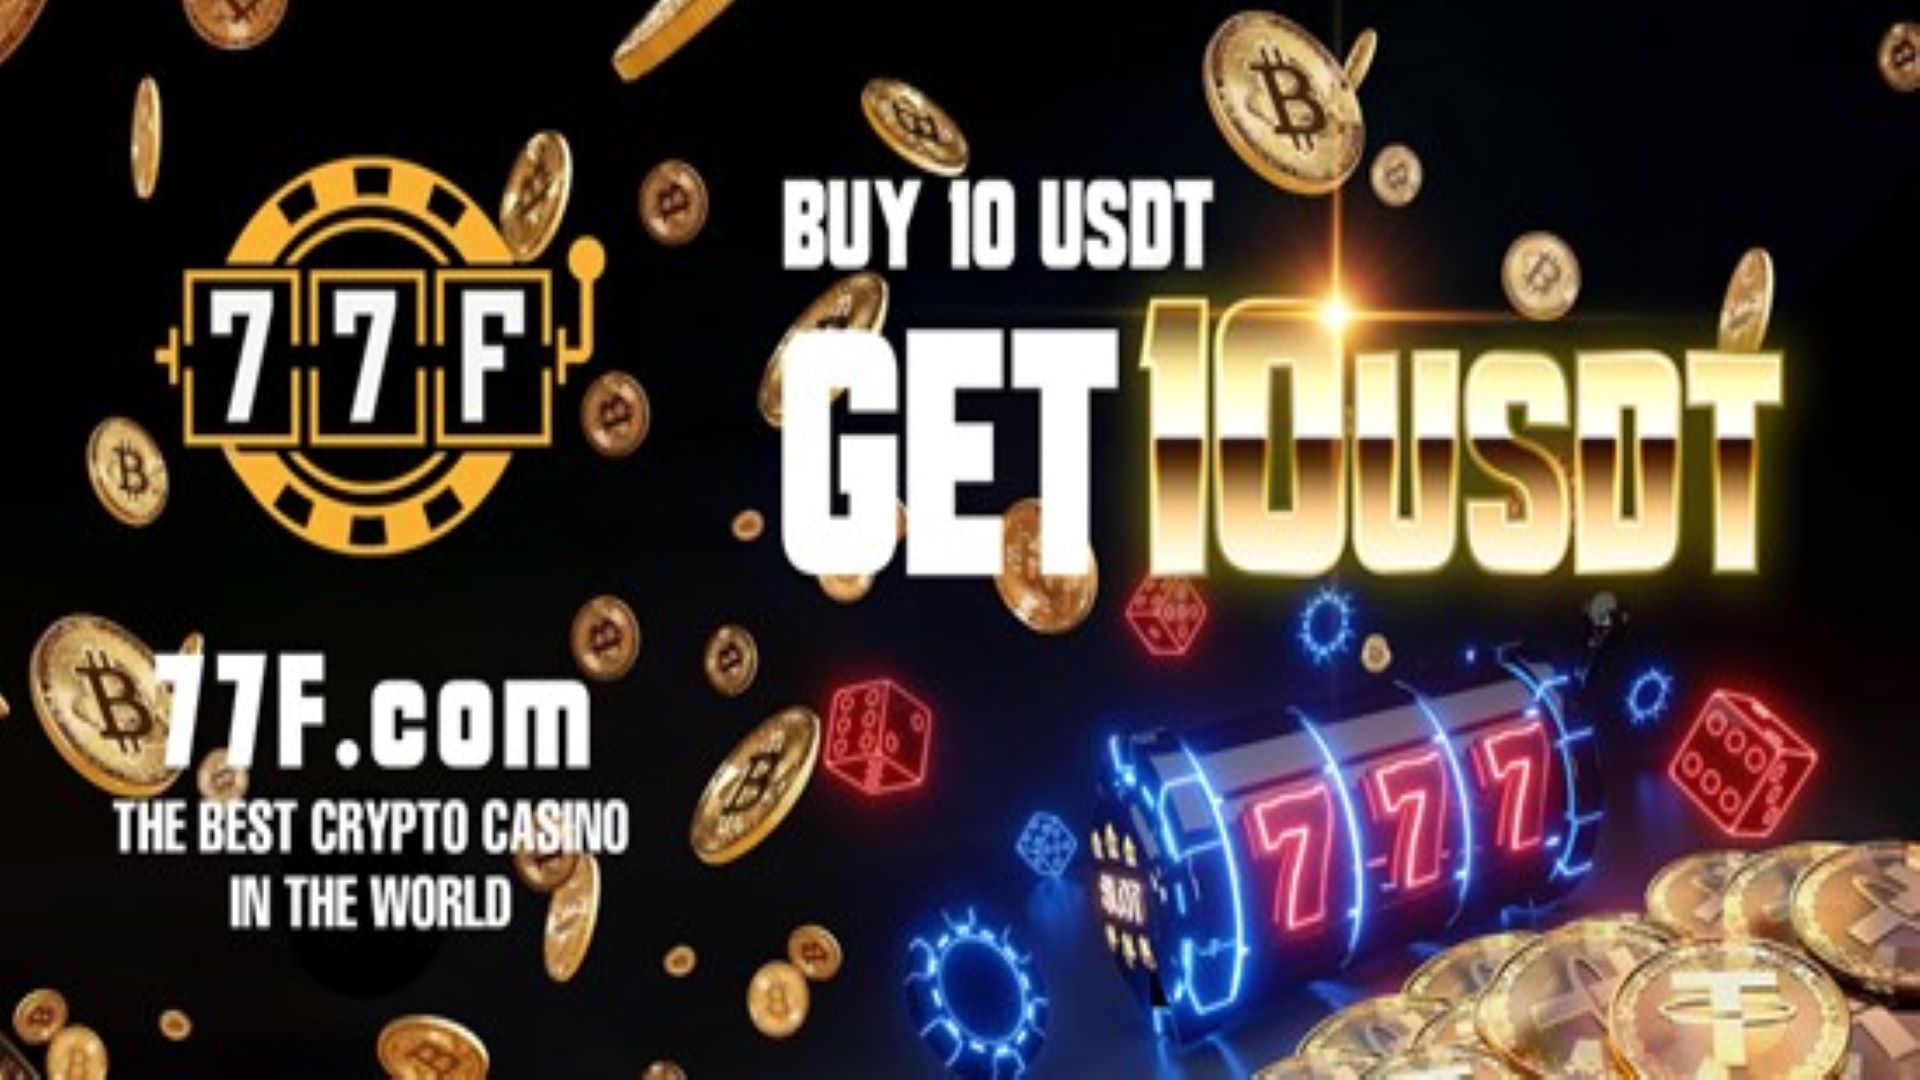 77f-brand-new-crypto-casino-with-the-highest-rebate-ever